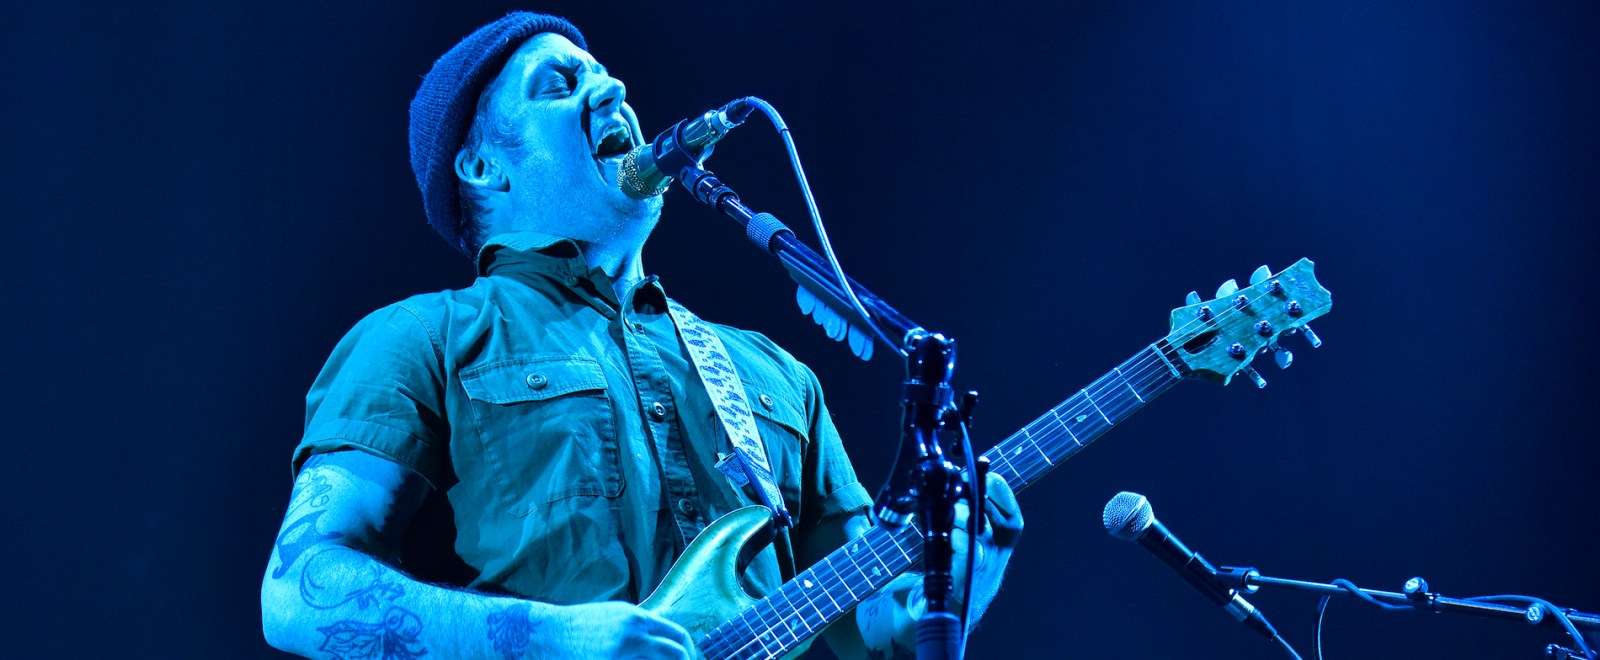 Simon O'Connor of the band Modest Mouse performs on stage at